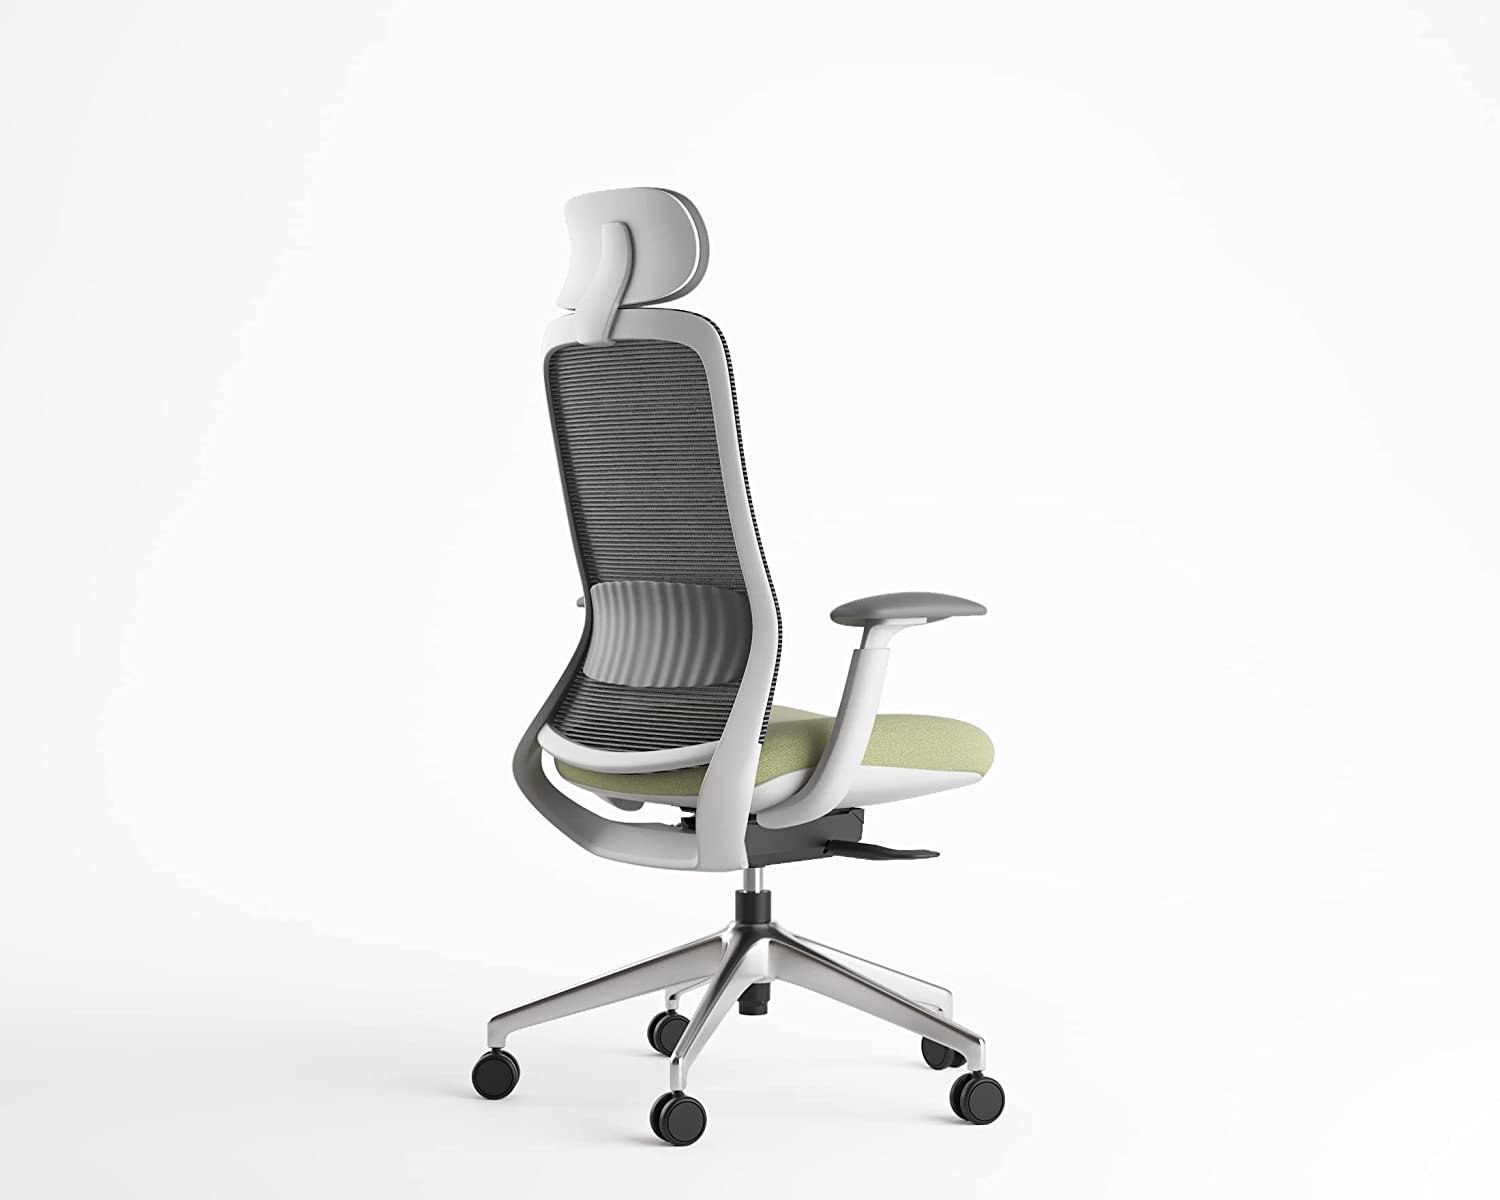 NIO Chair, Ergonomic Design, Premium Office & Computer Chair with adjustable features by Navodesk Lime green